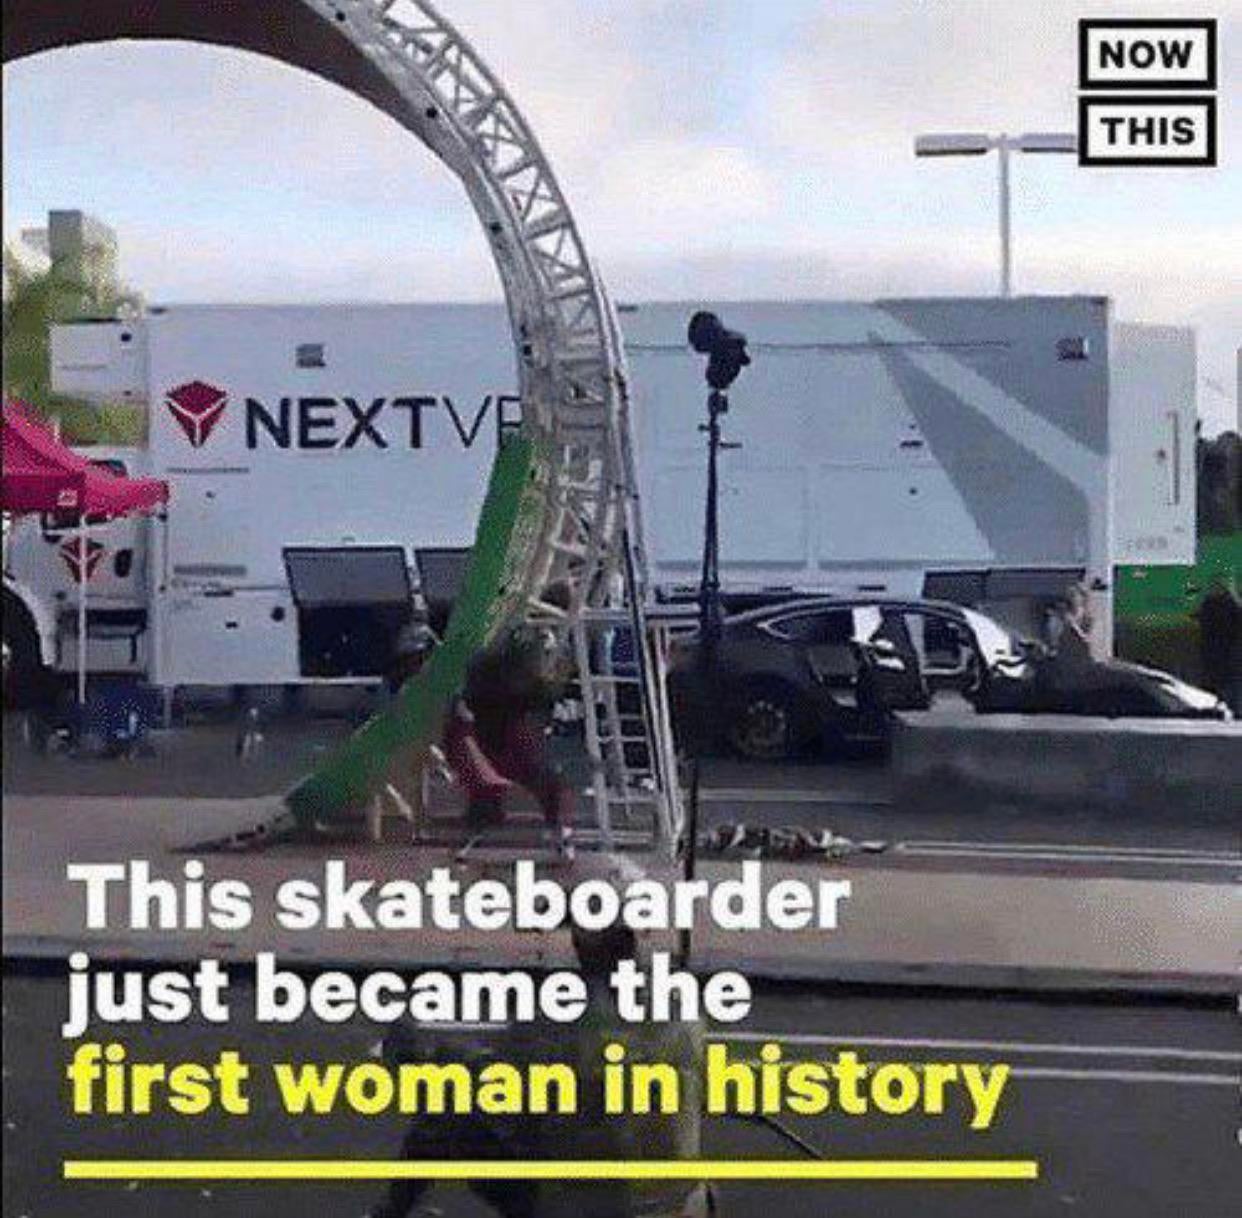 History,  History Memes History,  text: NOW THIS 9 NEXTV This skateboarder just became the first woman in histor 